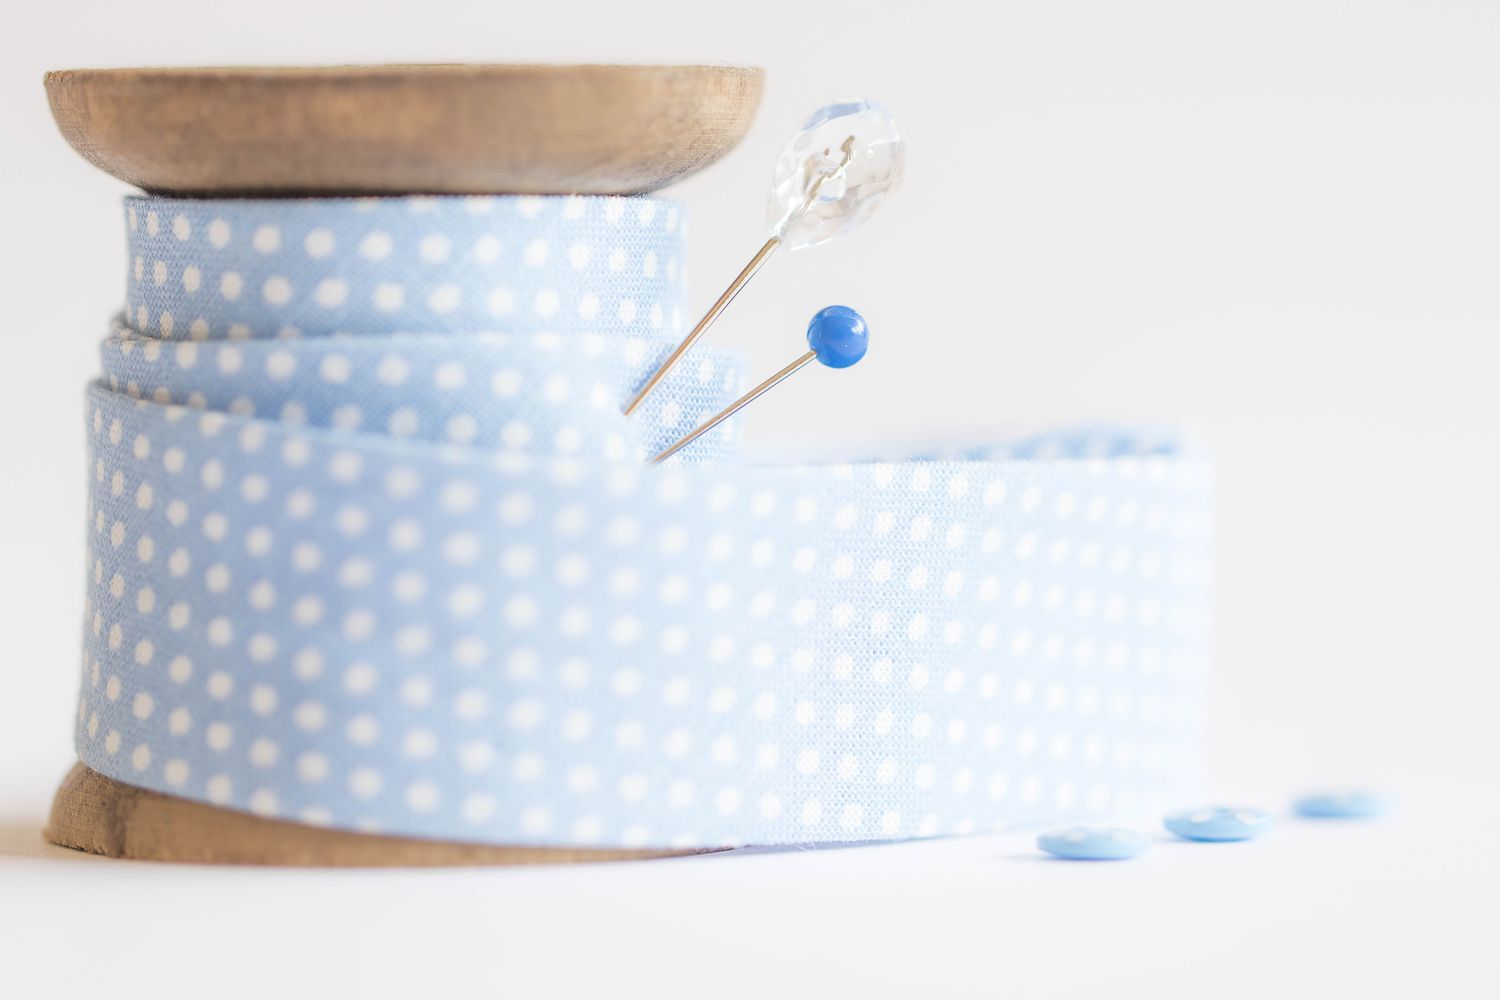 Blue and white spotted bias binding on spool with pins